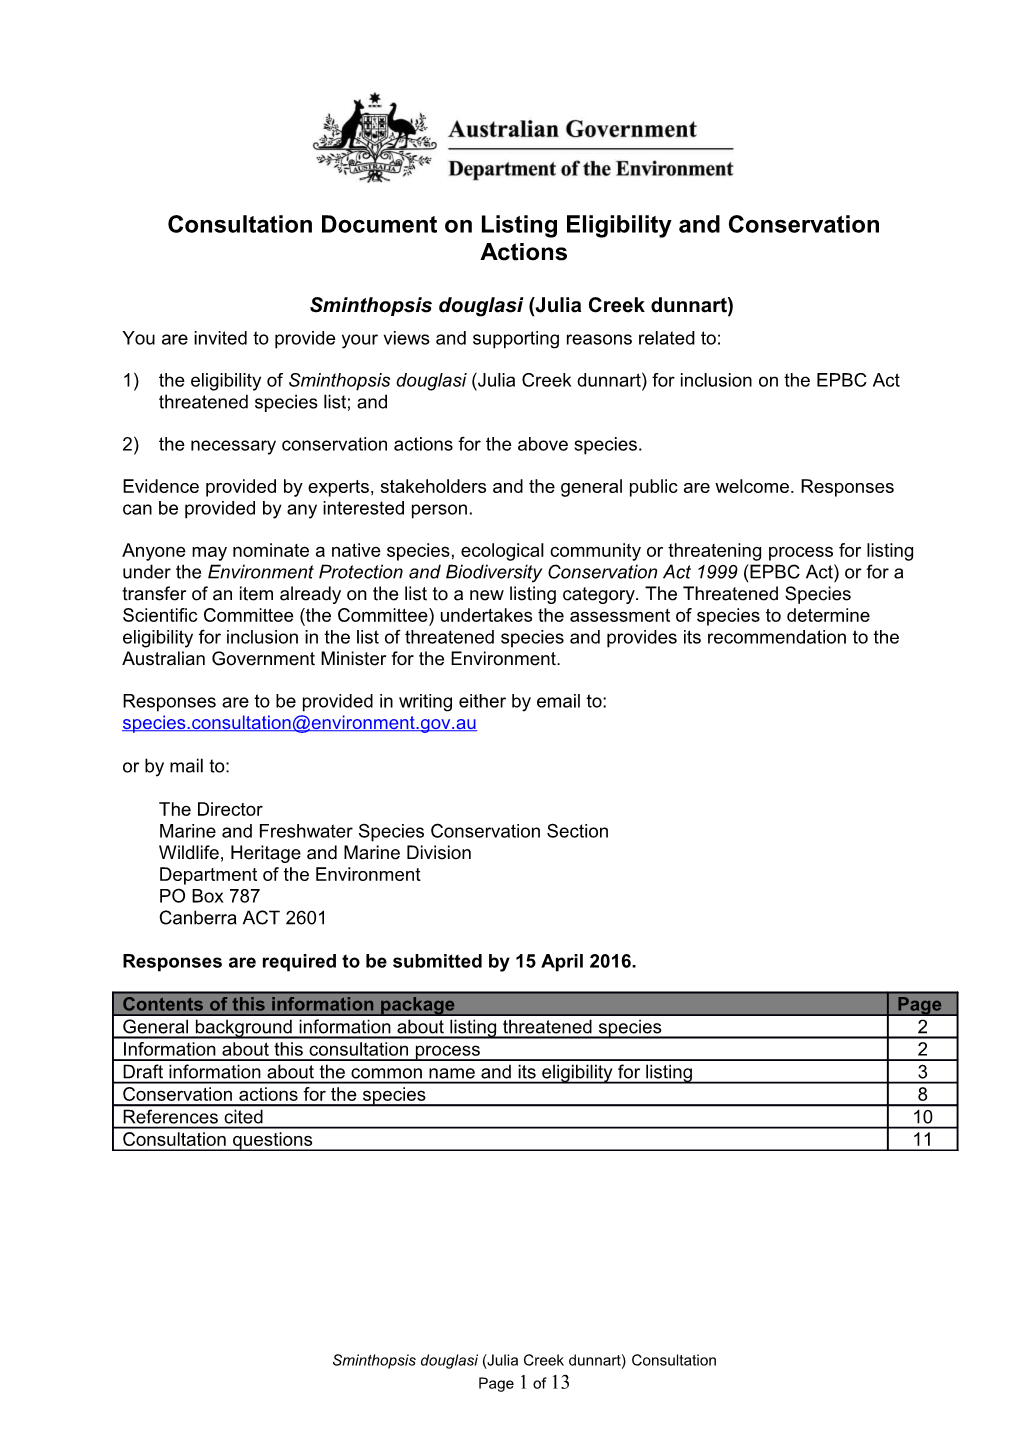 Consultation Document on Listing Eligibility and Conservation Actions Sminthopsis Douglasi